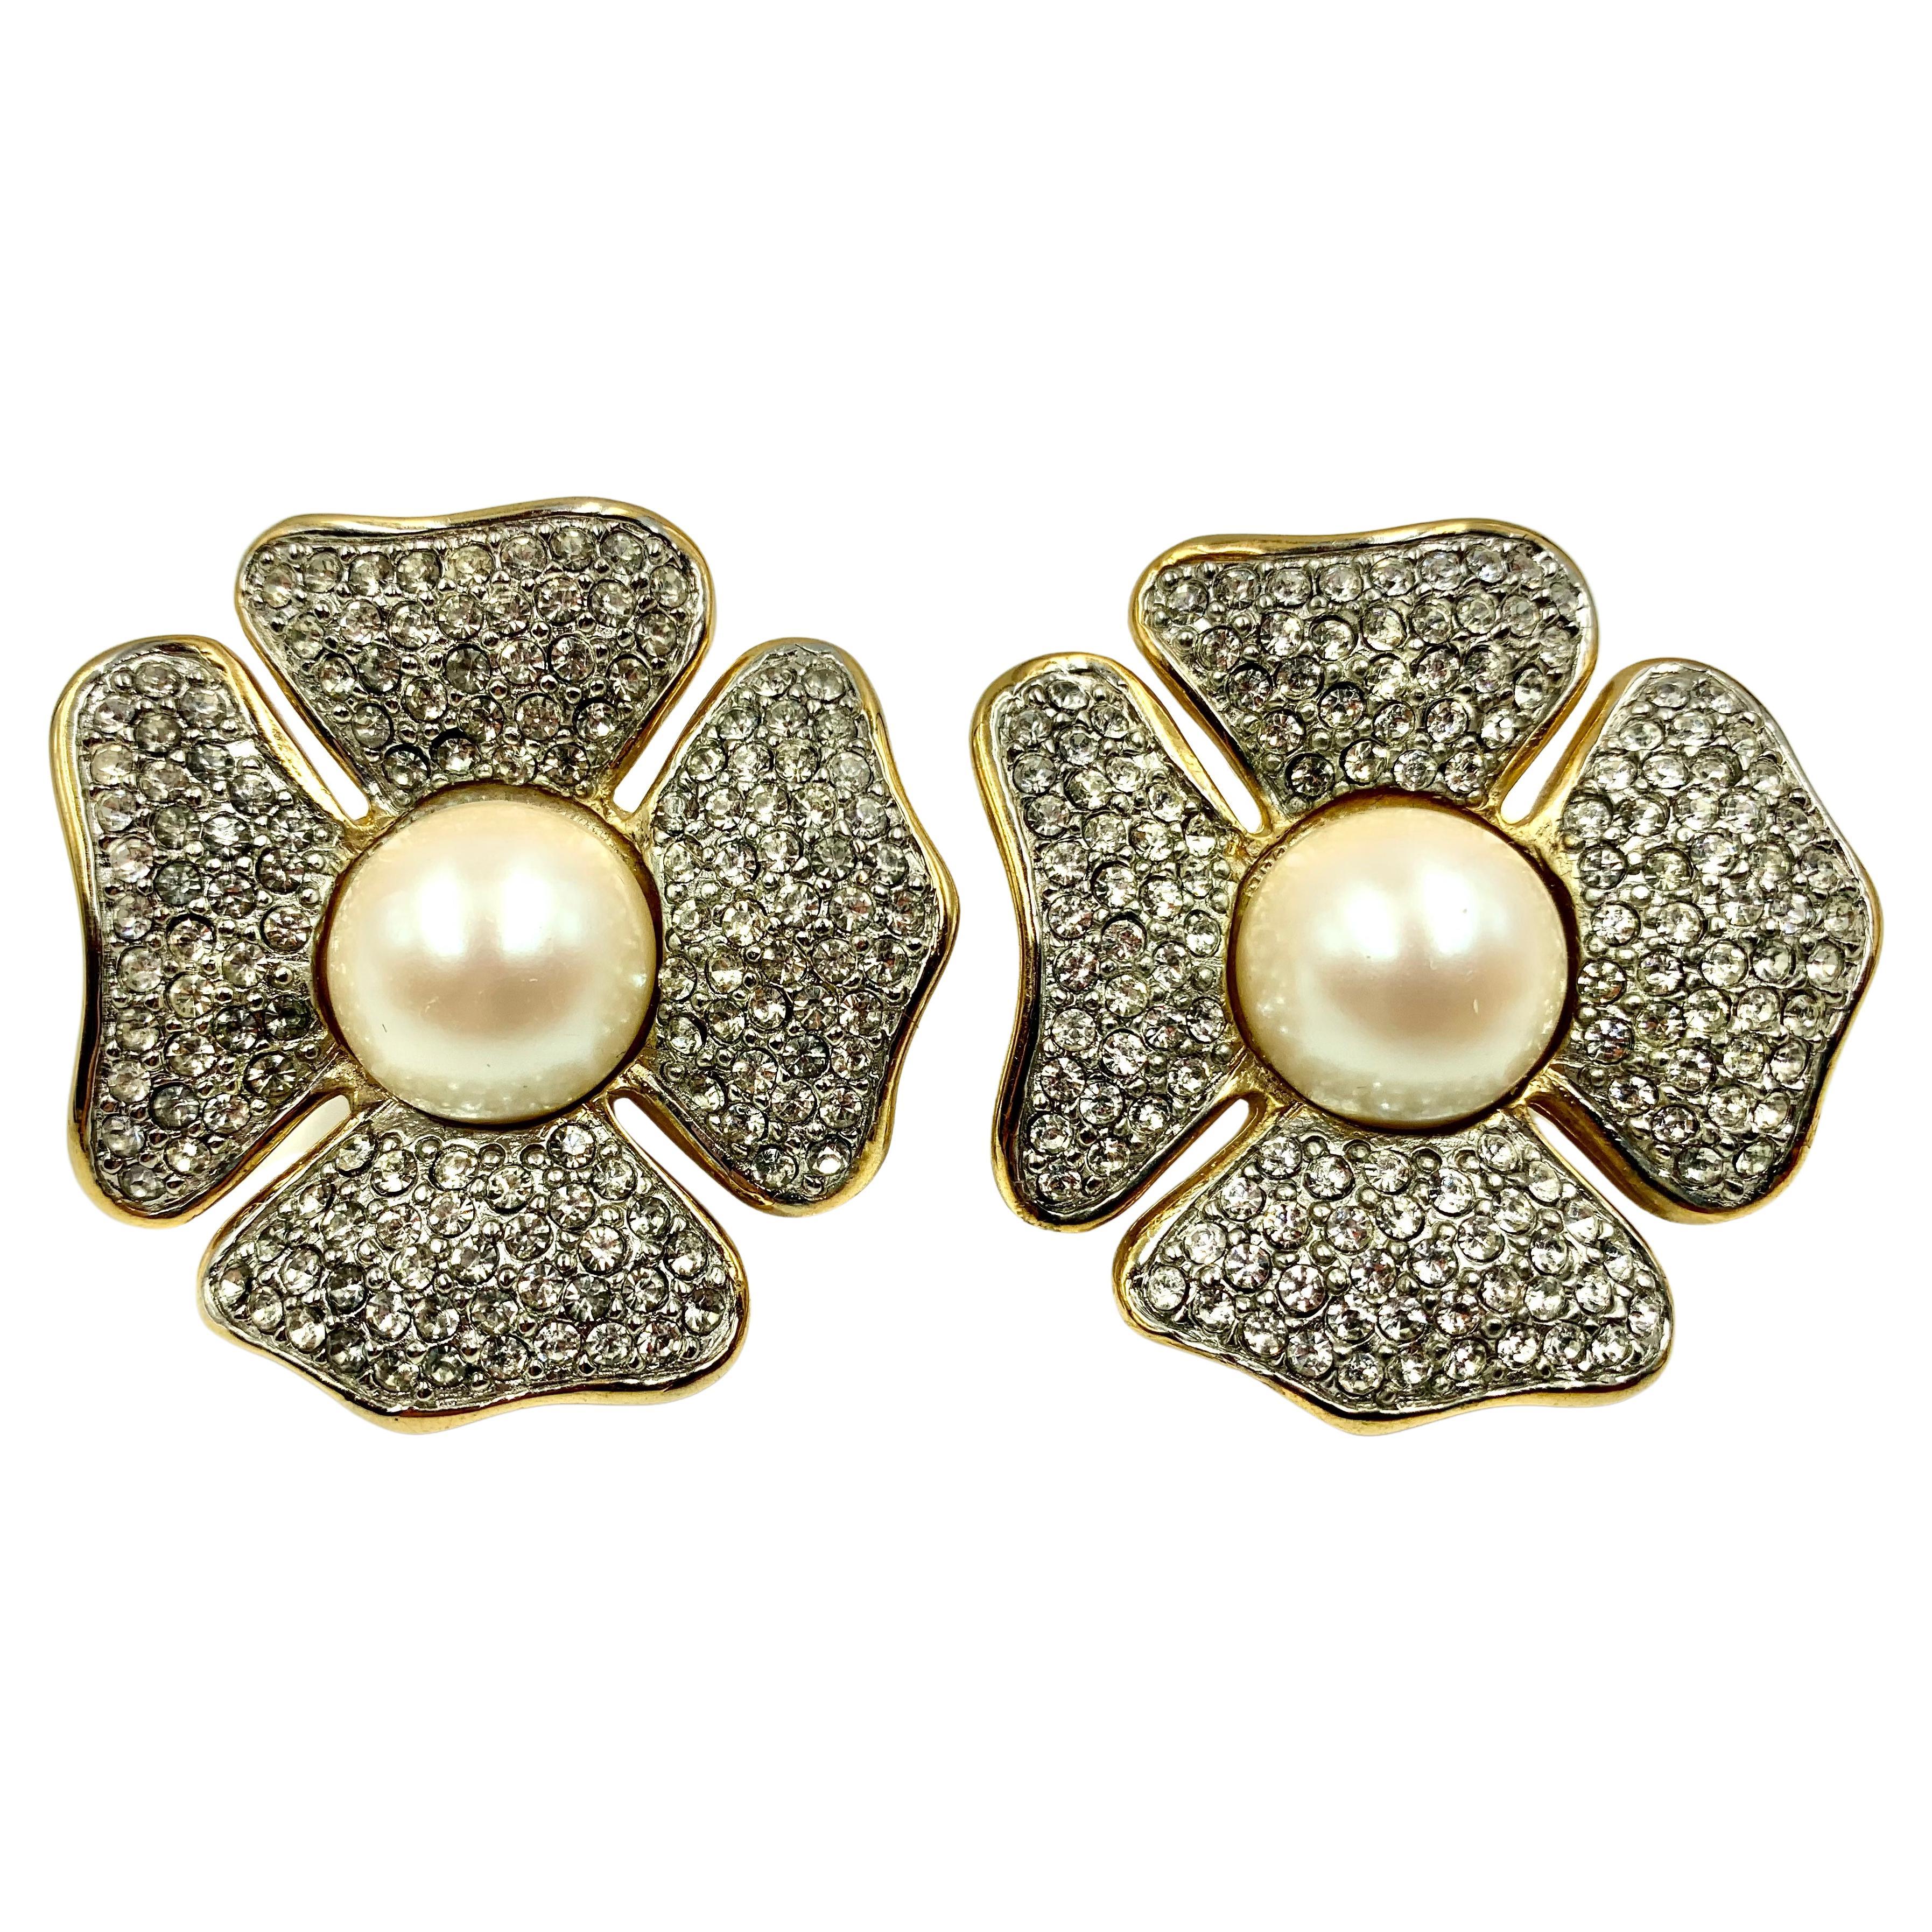 Oversize 1980s Vintage Valentino Four-Leaf Clover Faux Pearl Crystal Earrings For Sale